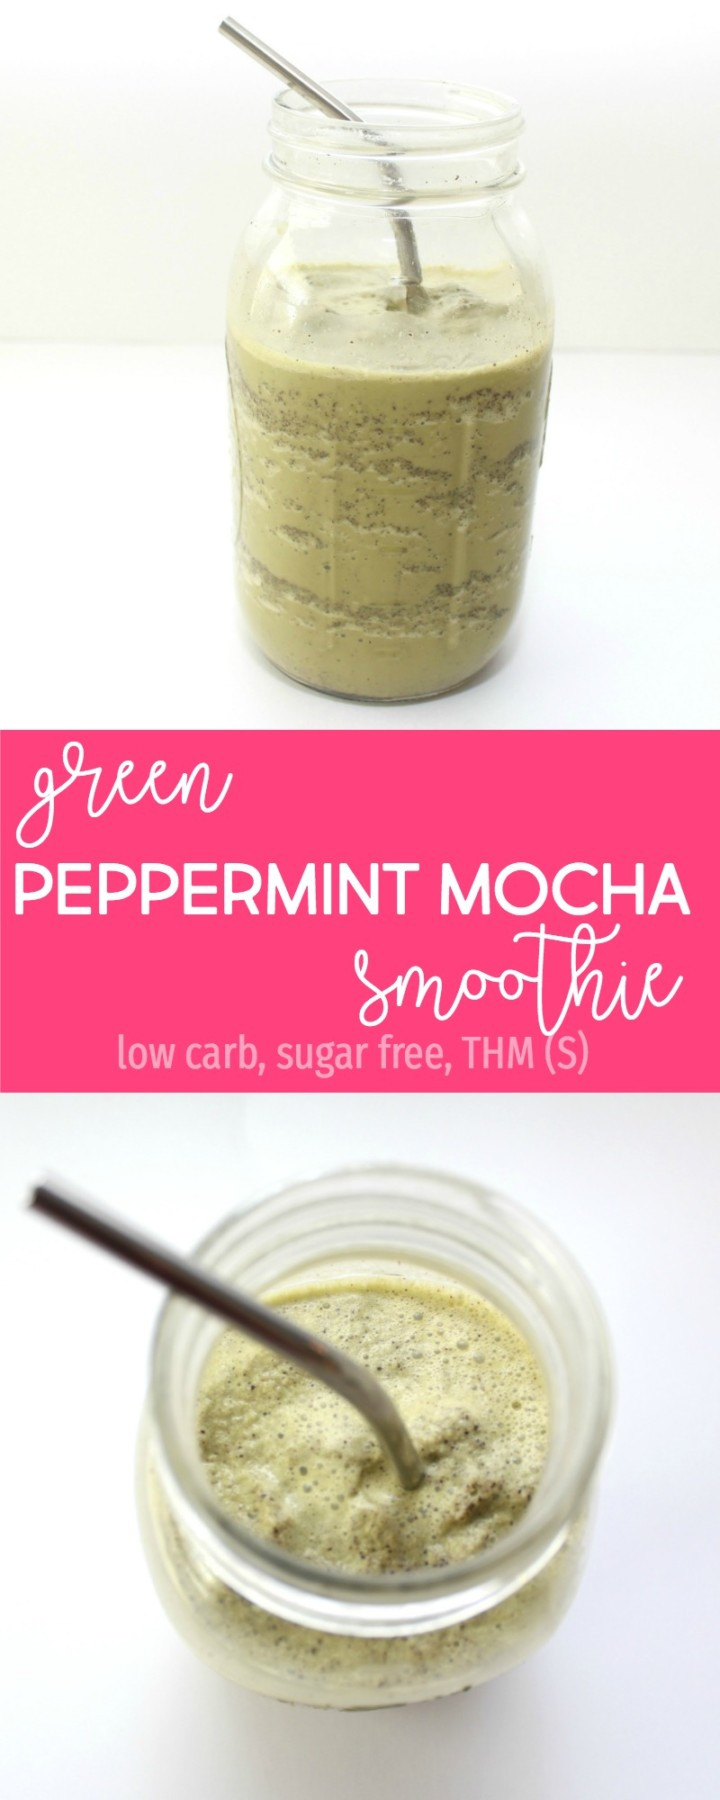 Trim Healthy Mama Smoothies
 green peppermint mocha smoothie recipe My Chocolate Moments